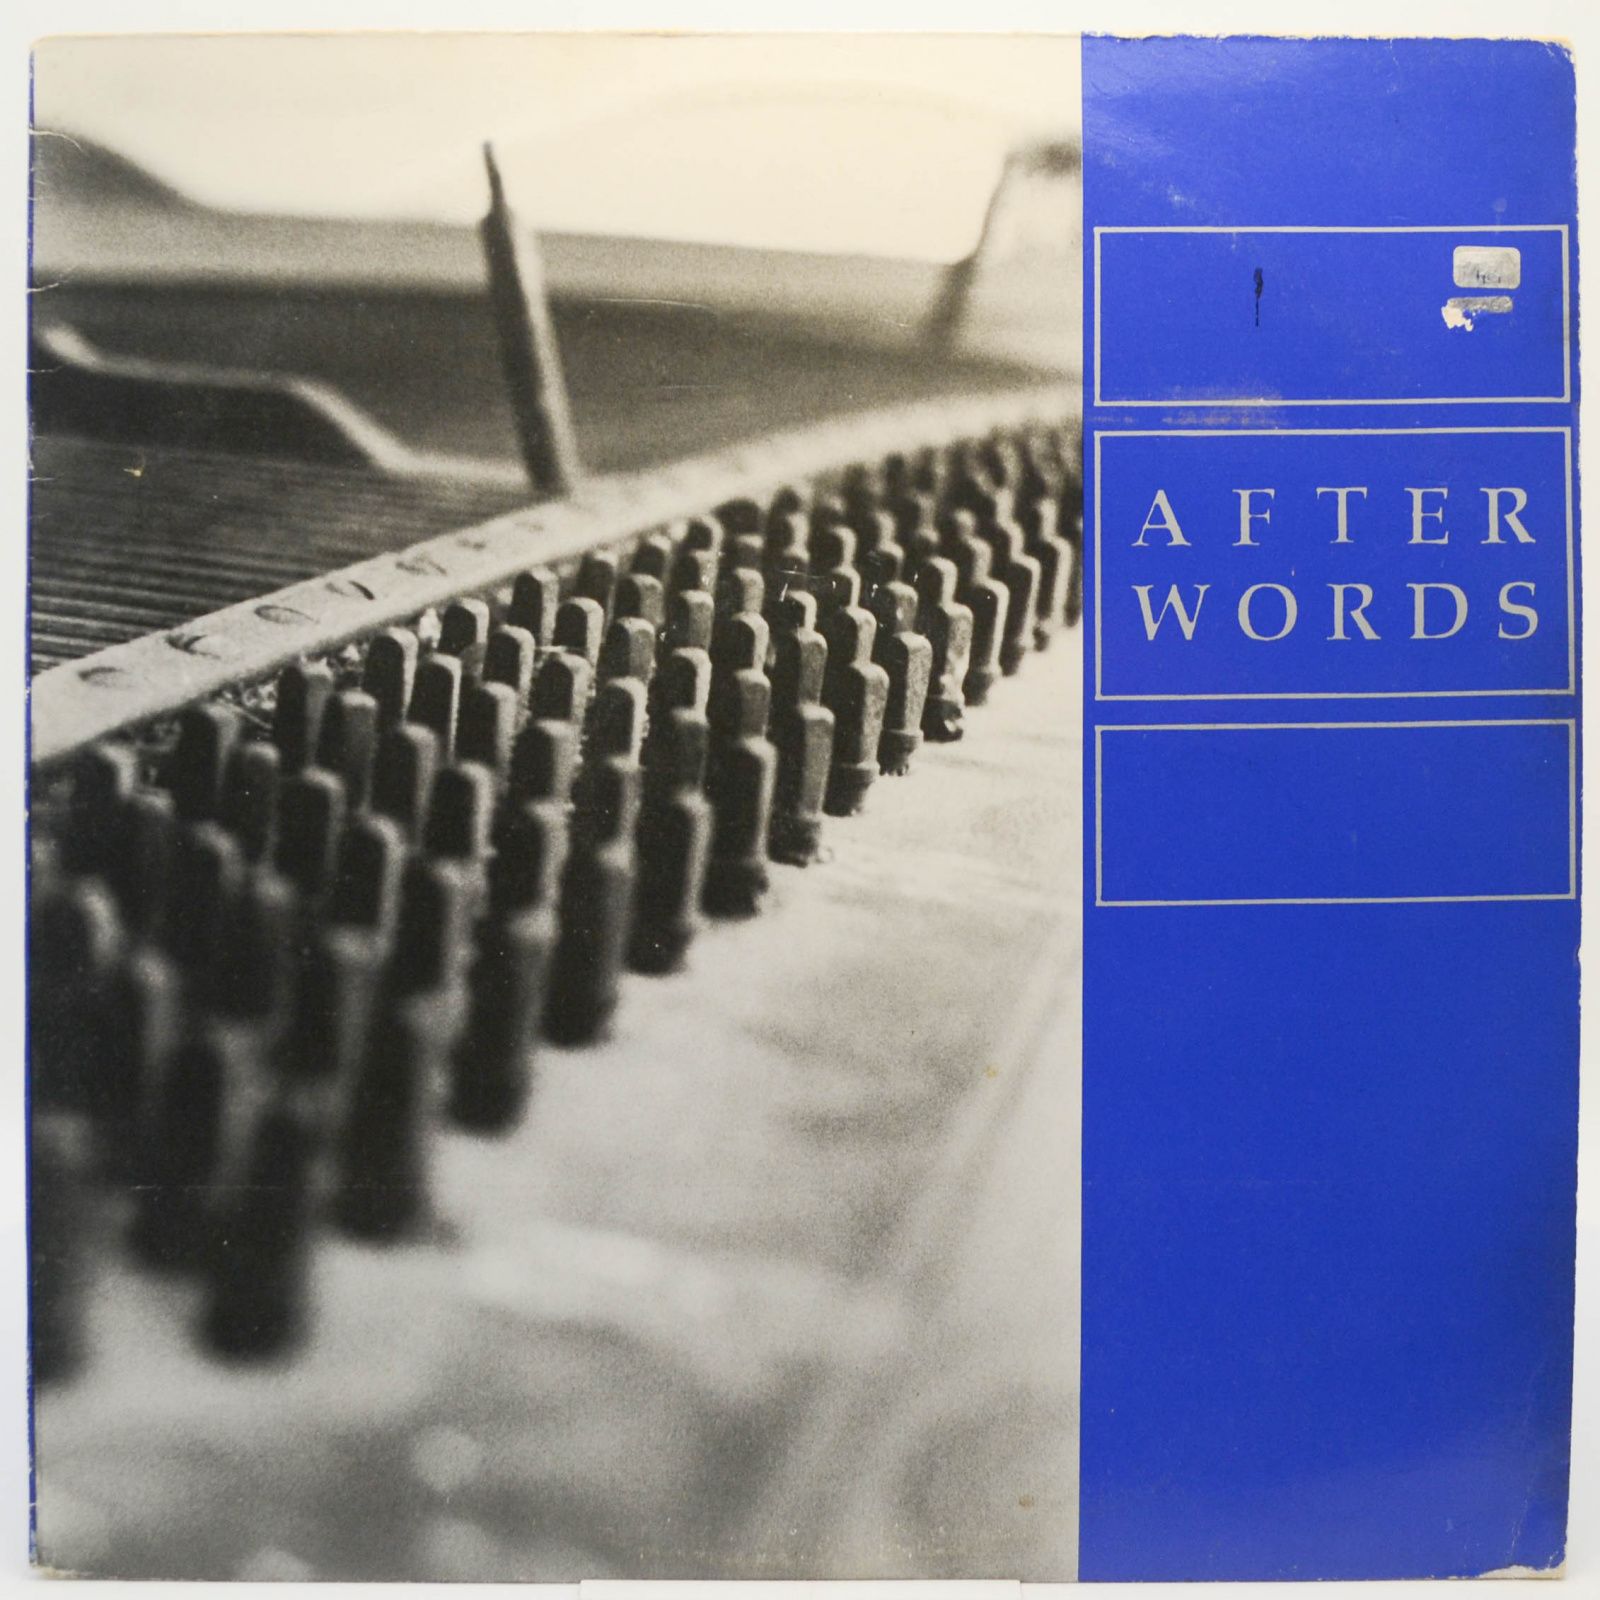 After Words — After Words, 1989